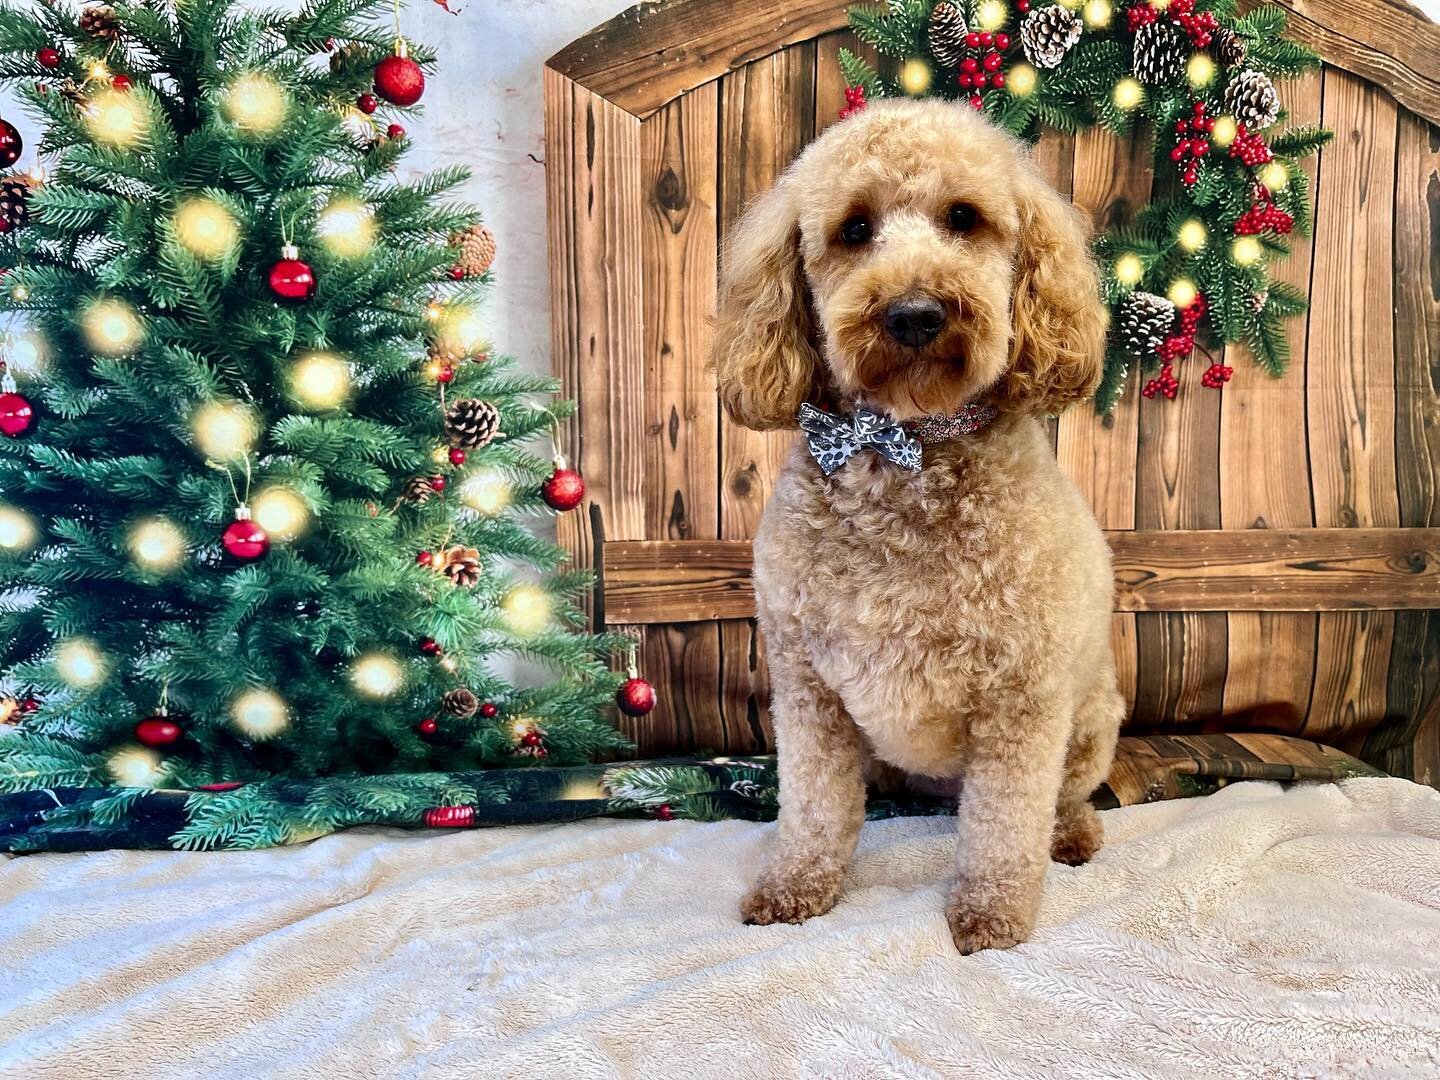 More gorgeous &amp; adorable pooches. Just love my job 🥰😇🐾🐶🎅🏻🎄 #pawsgloriouspaws #eastmarkham #doggroomer #lovemyjob